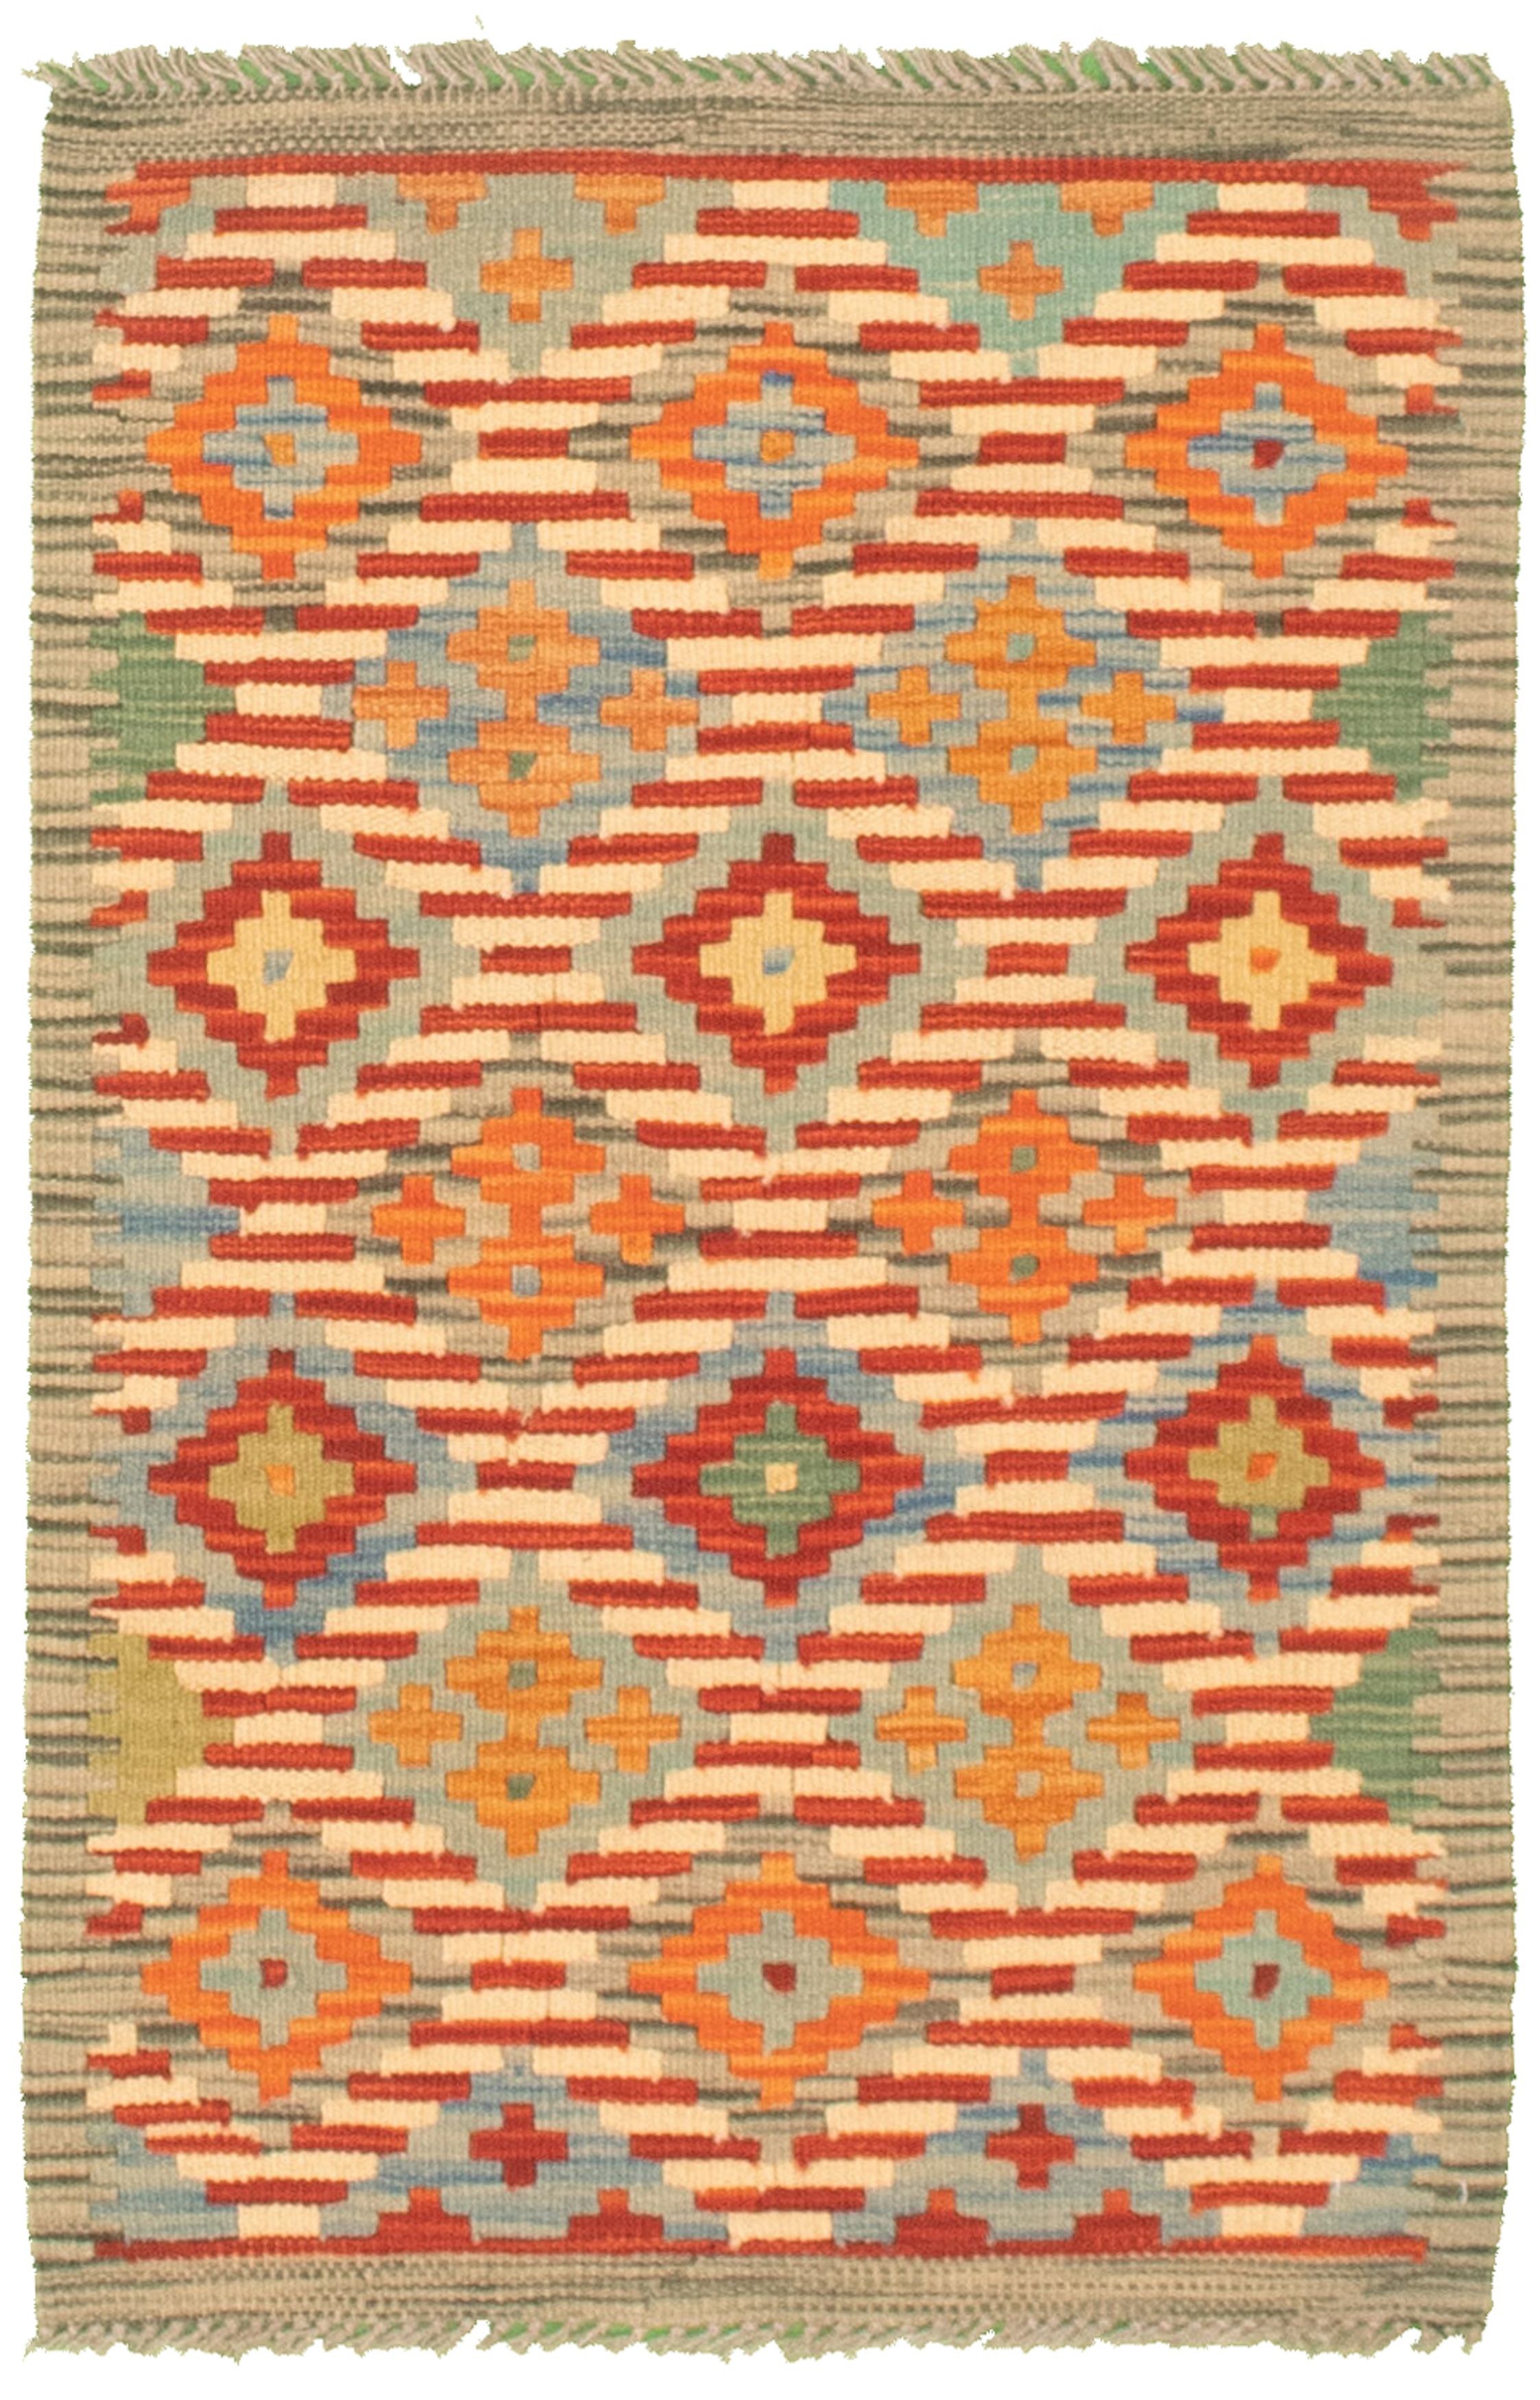 Hand woven Bold and Colorful  Cream, Red Cotton Kilim 2'0" x 3'2"  Size: 2'0" x 3'2"  